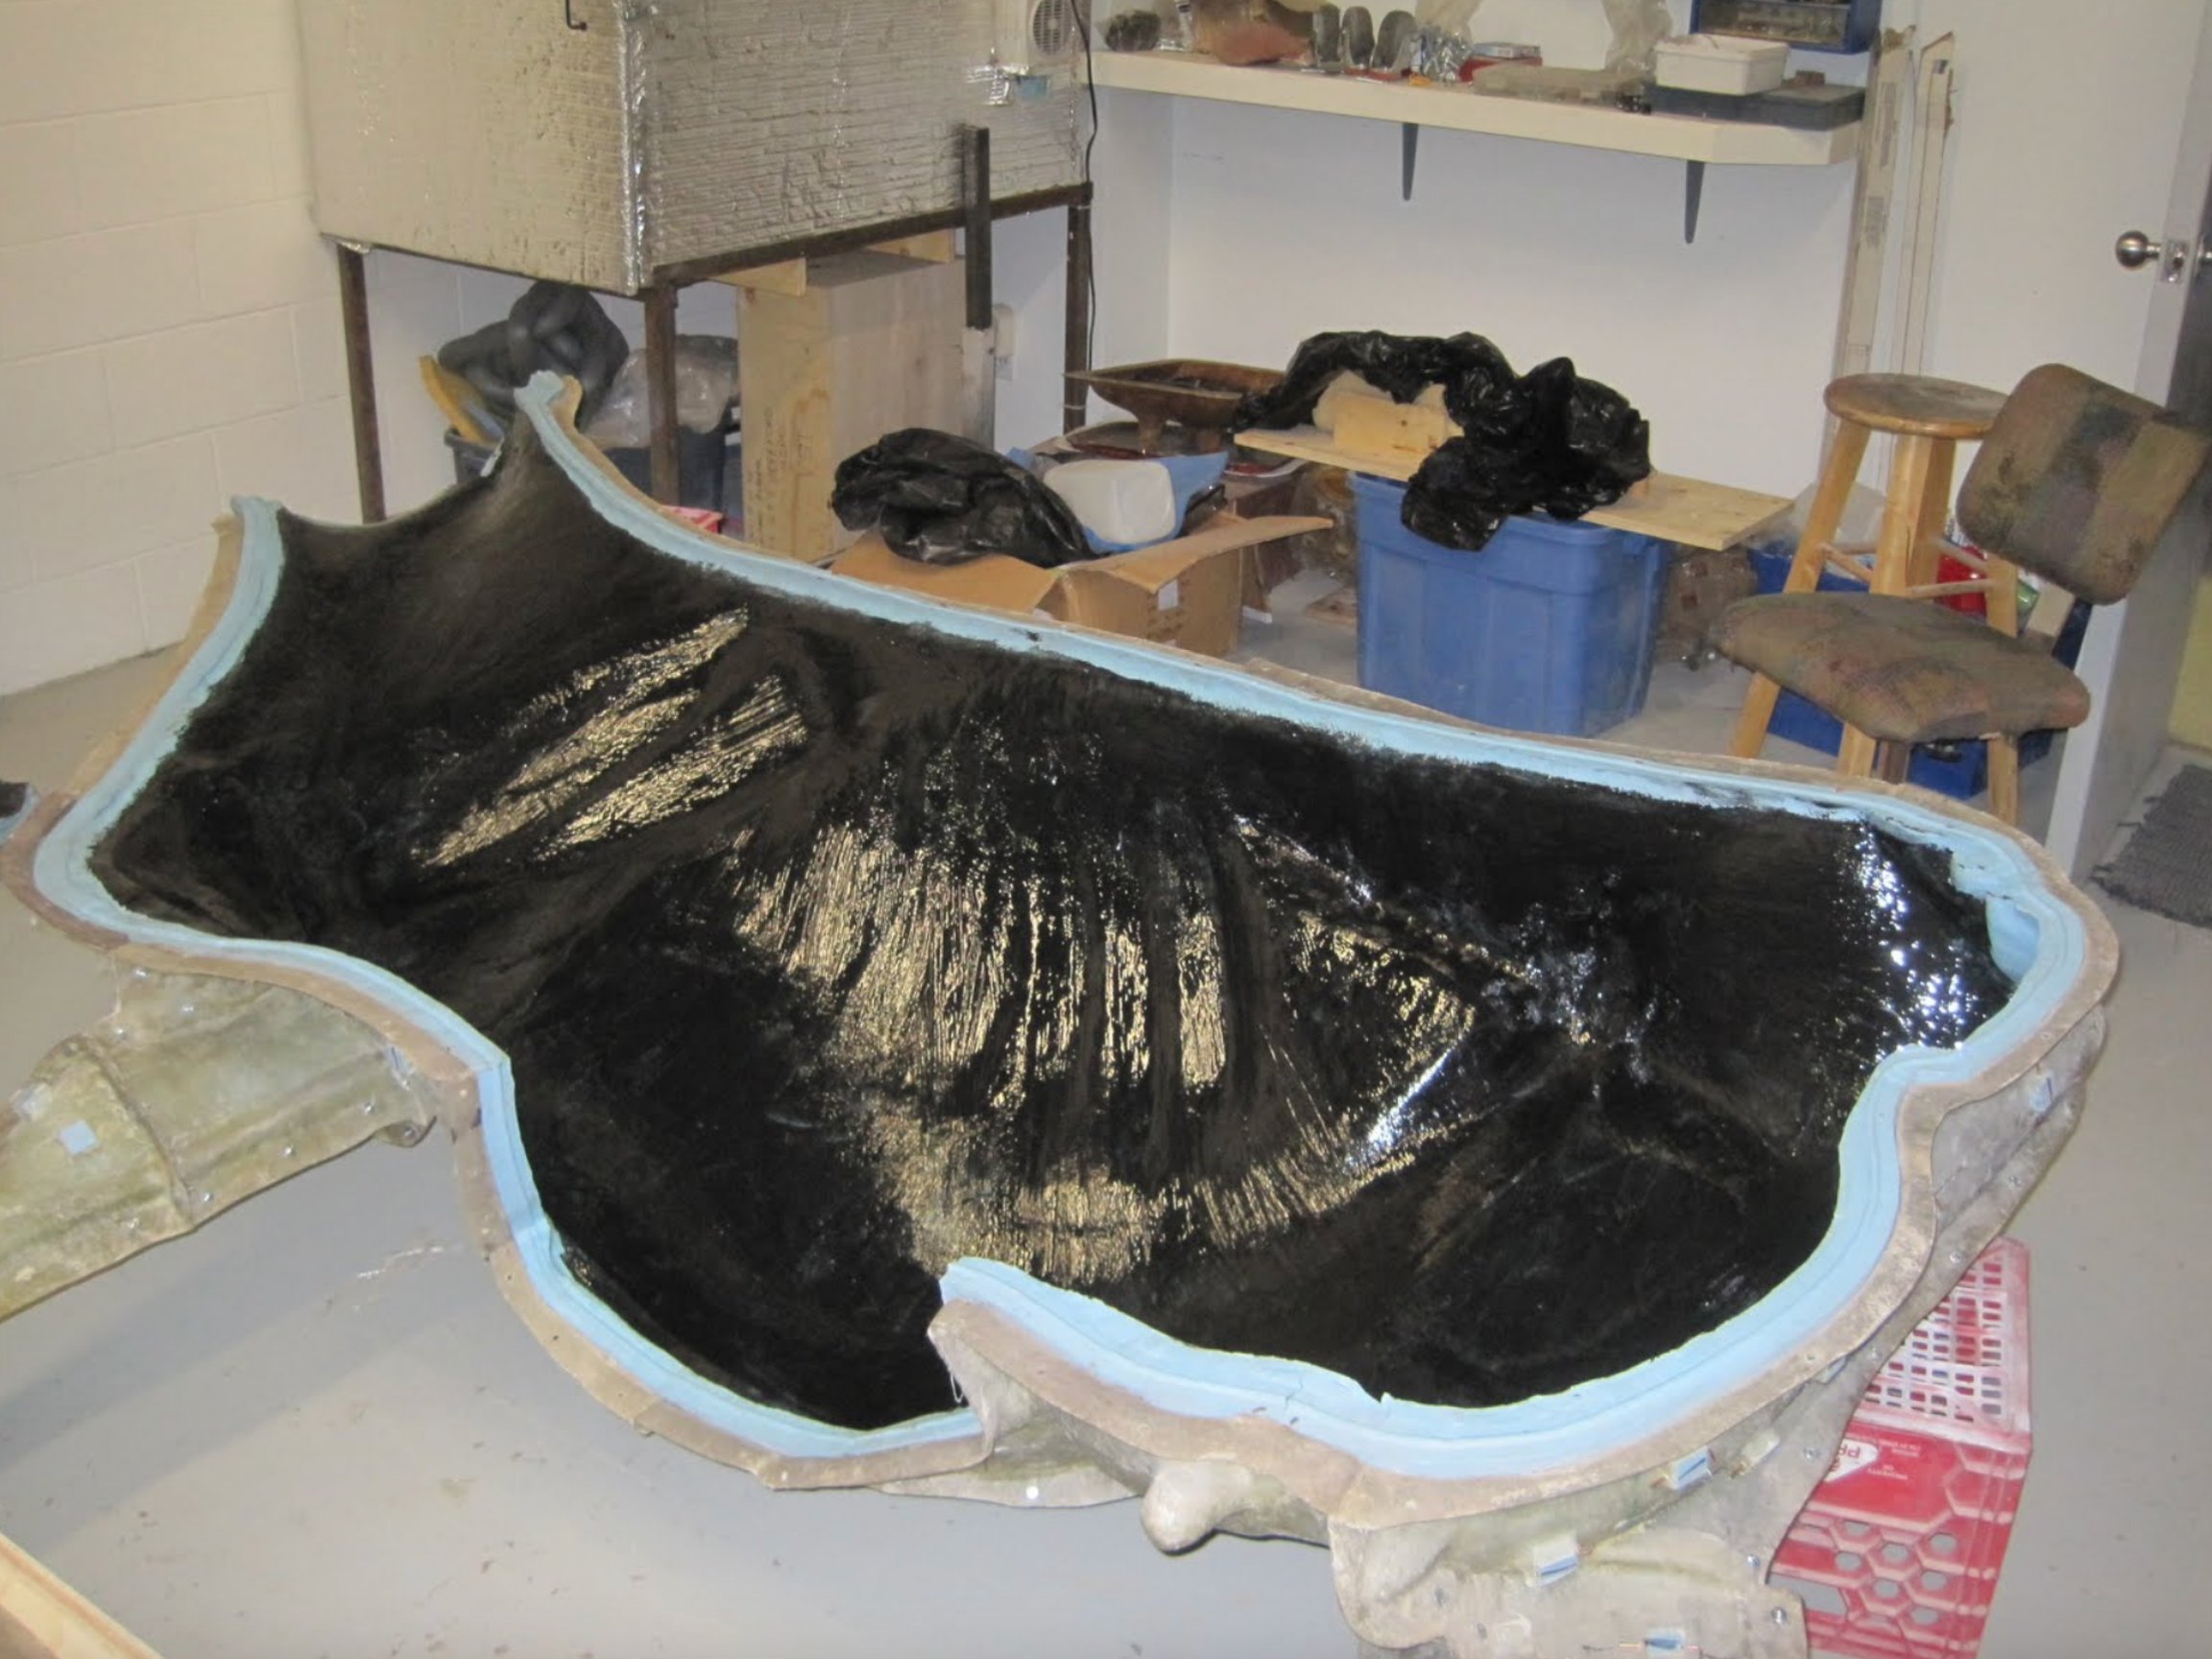  One side of the Holstein mold, with the first layer of epoxy resin applied. Several more layers of fiberglass will be applied, infused with epoxy resin. The two halves will then be joined together to complete the body. 